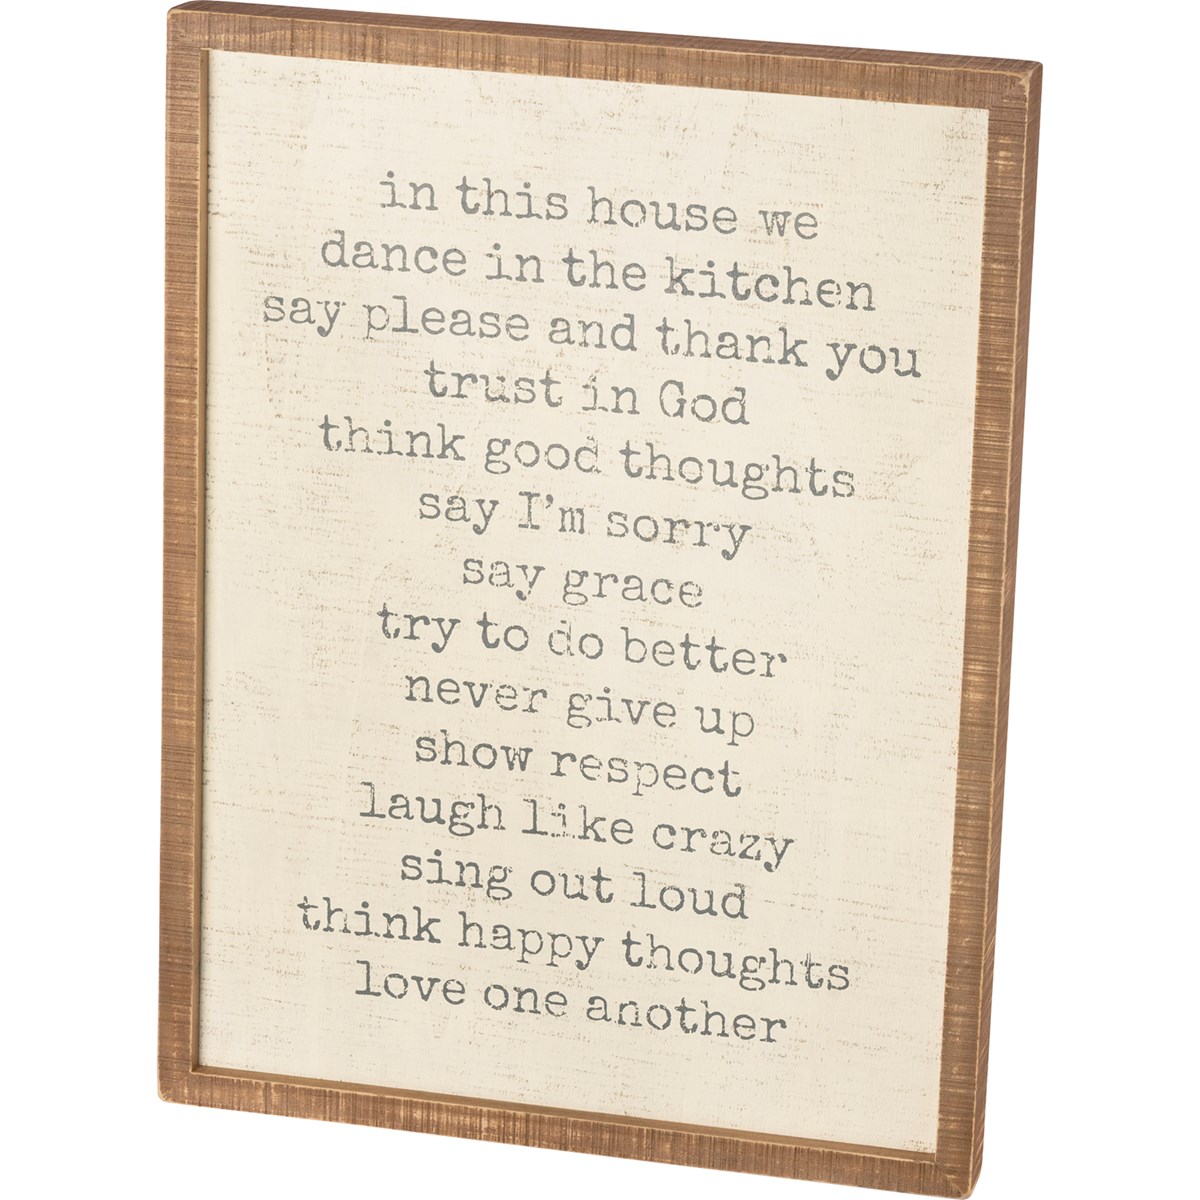 In This House We Trust In God Inset Box Sign - Wood